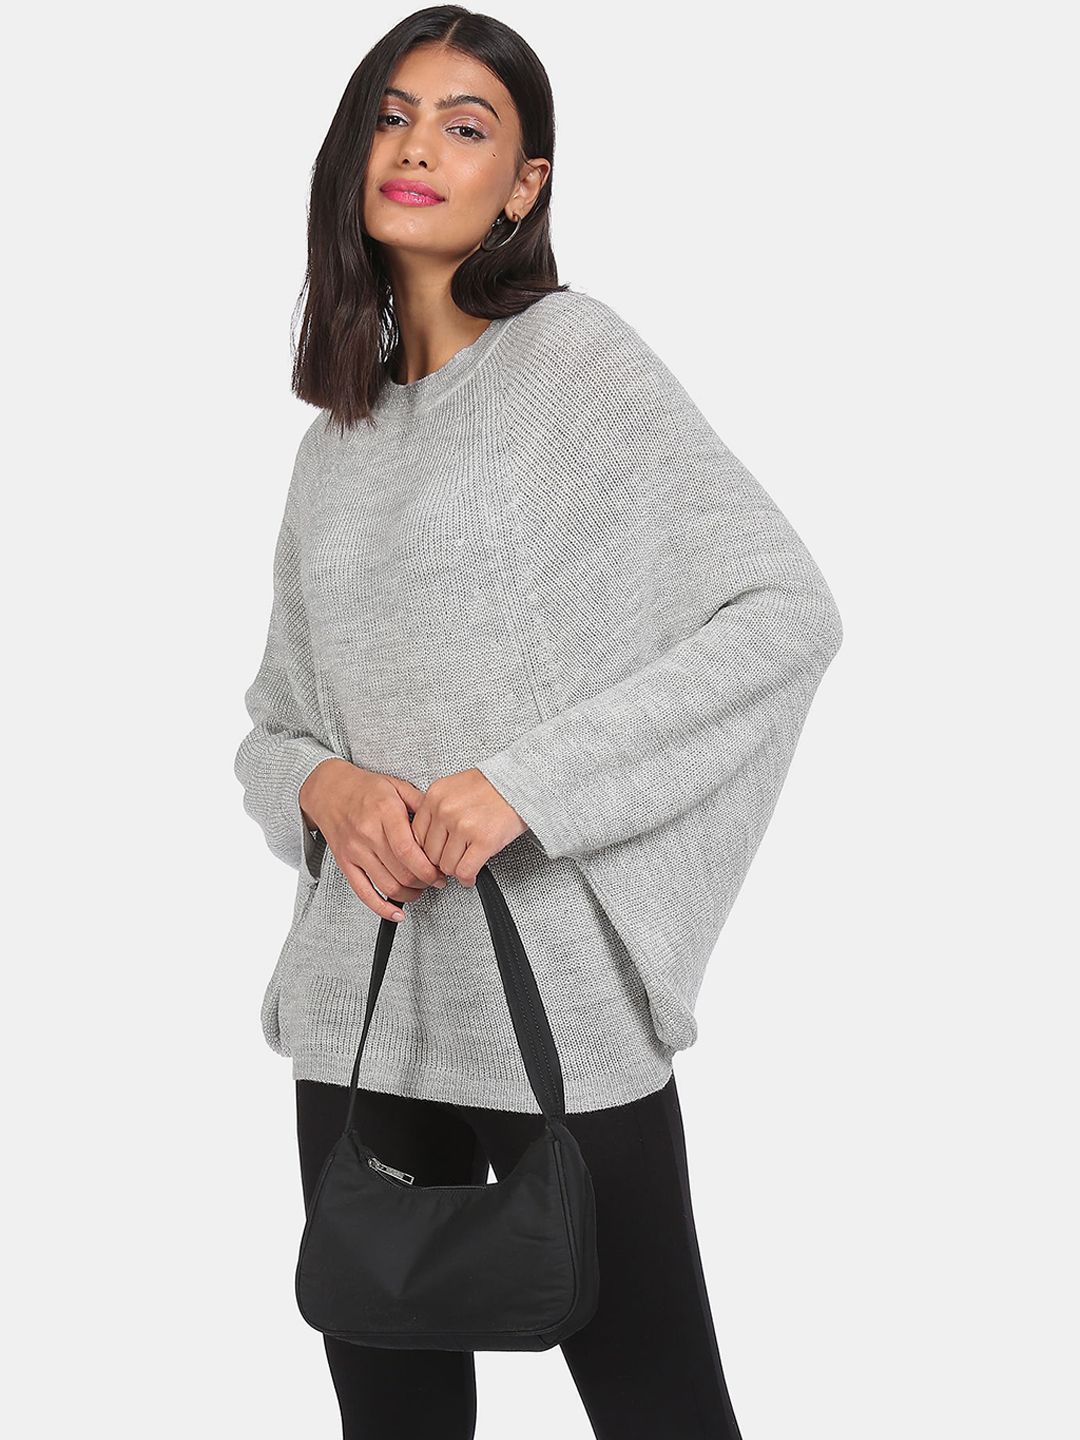 Sugr Women Grey Long Dolman Sleeve Solid Sweater Price in India